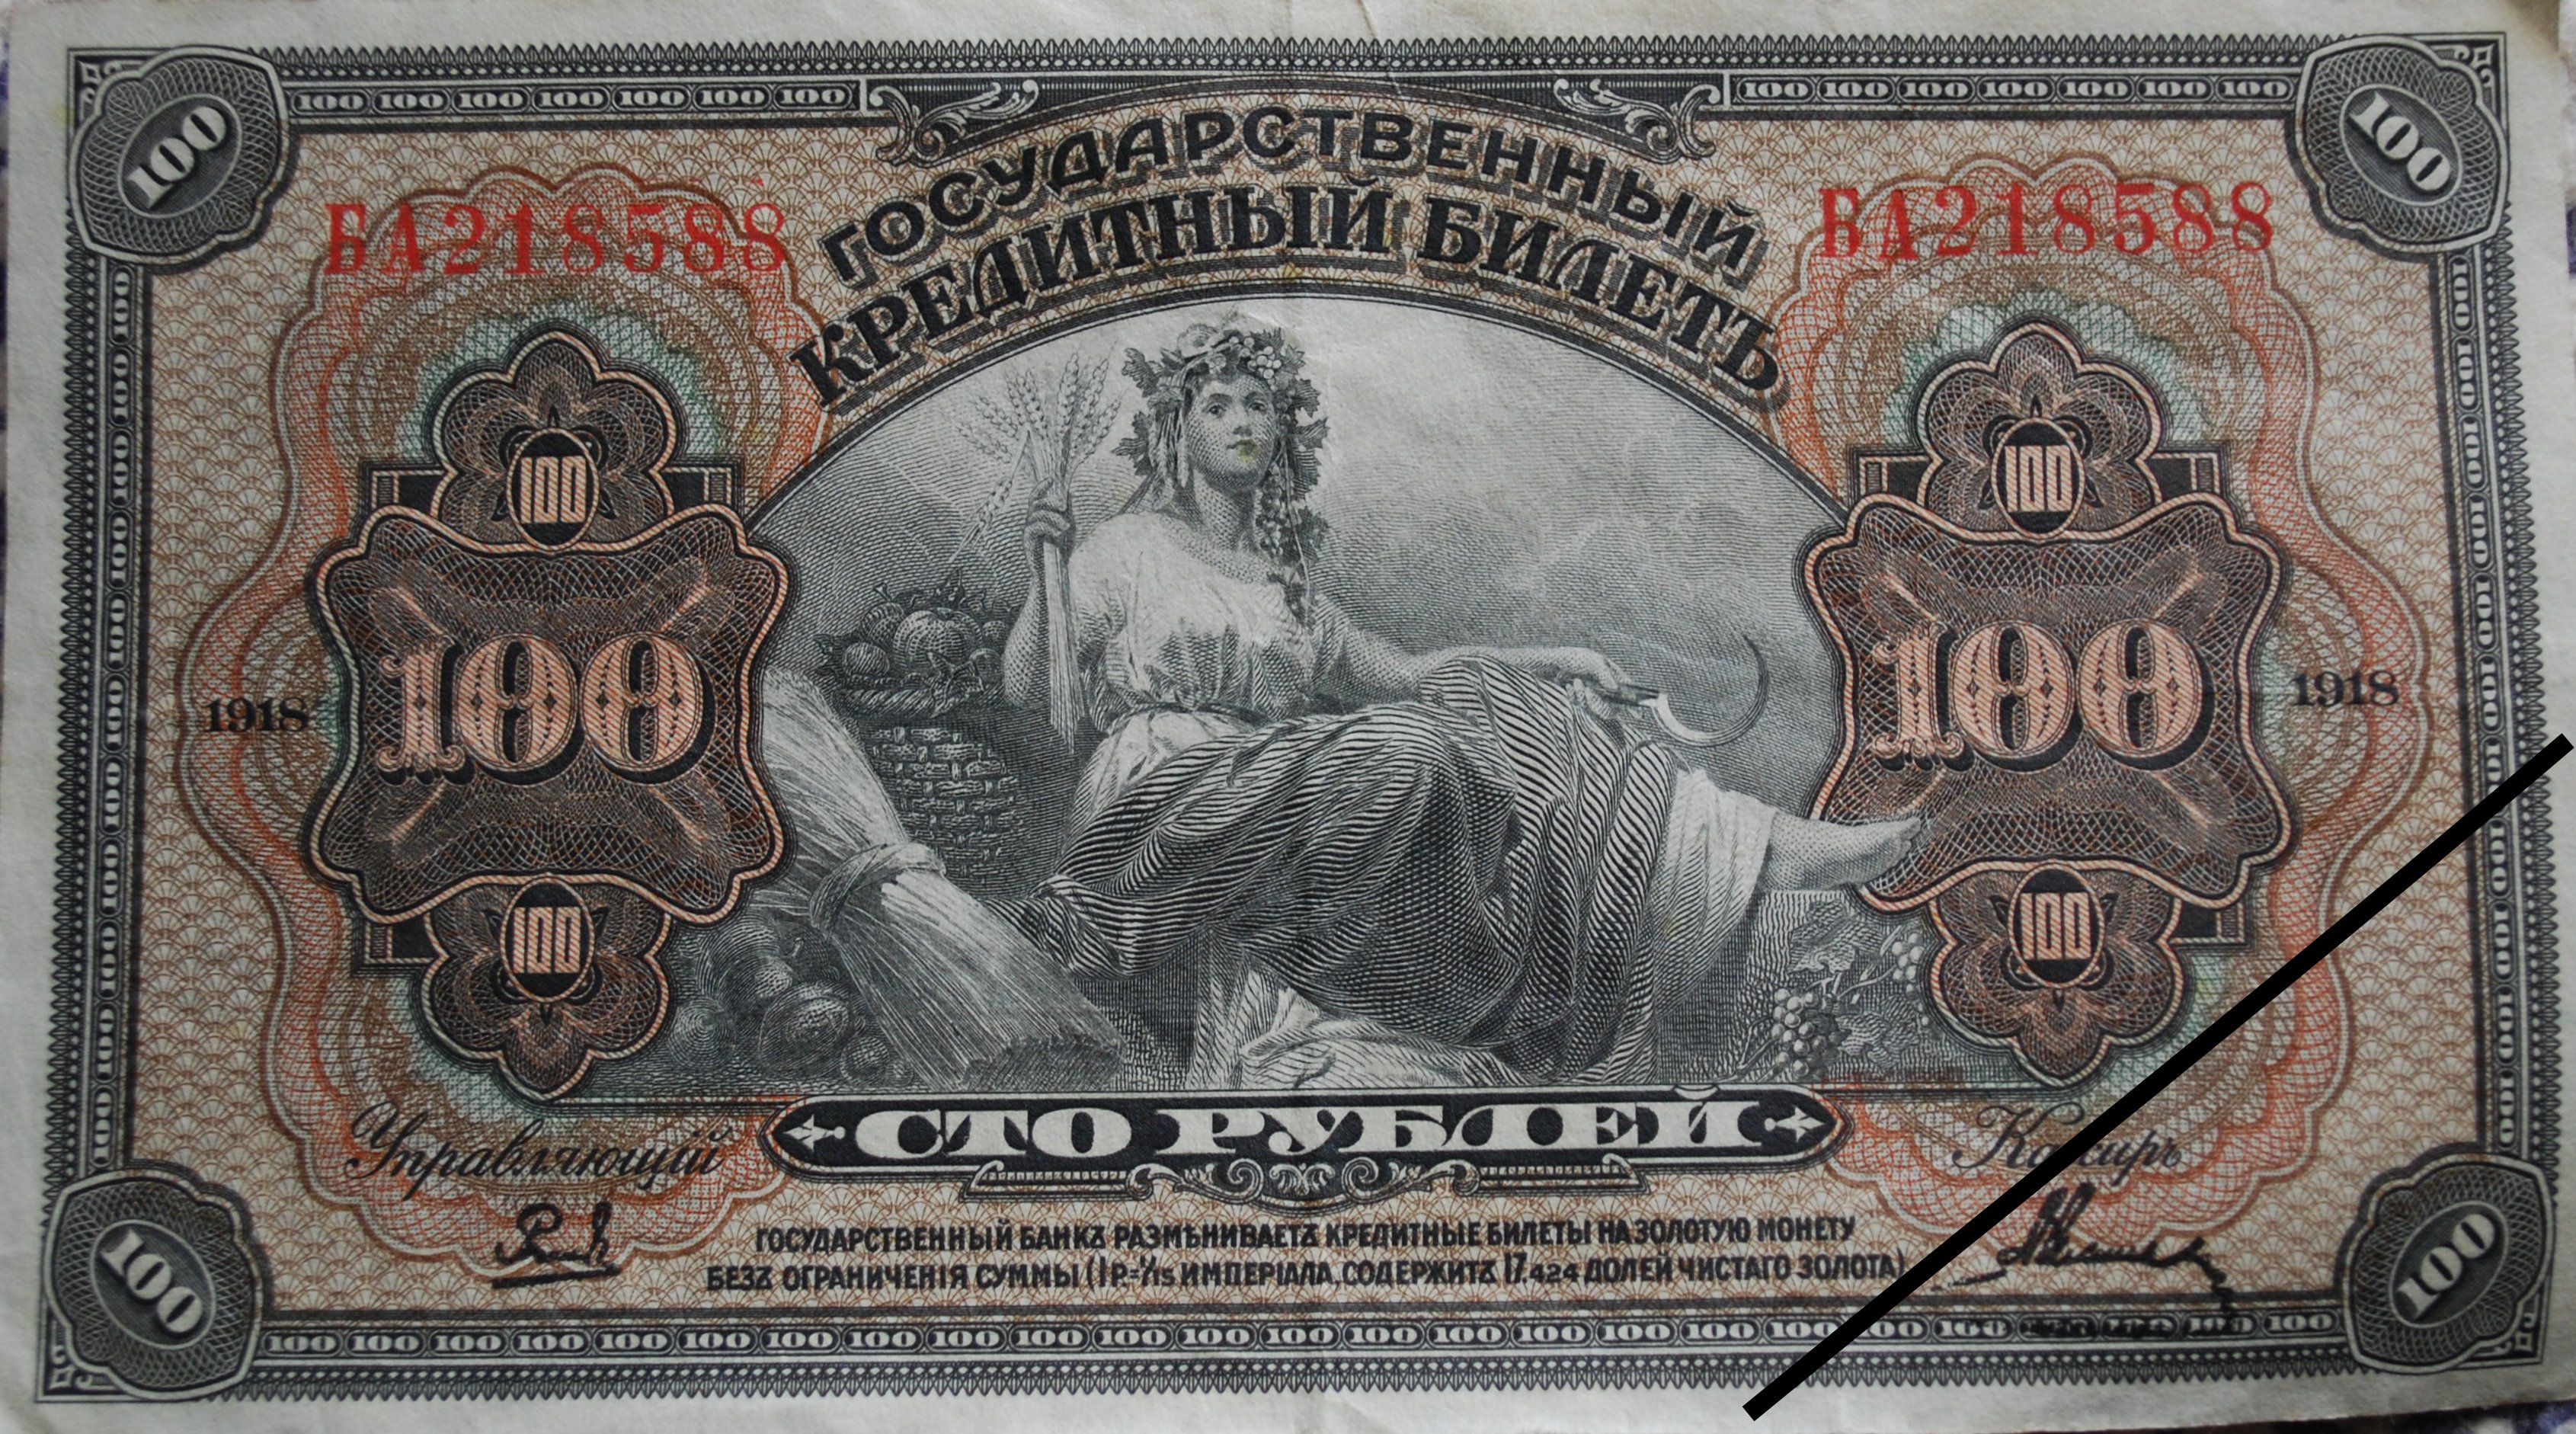 100 rubles bill of the Far East provisional government,1920,Japan